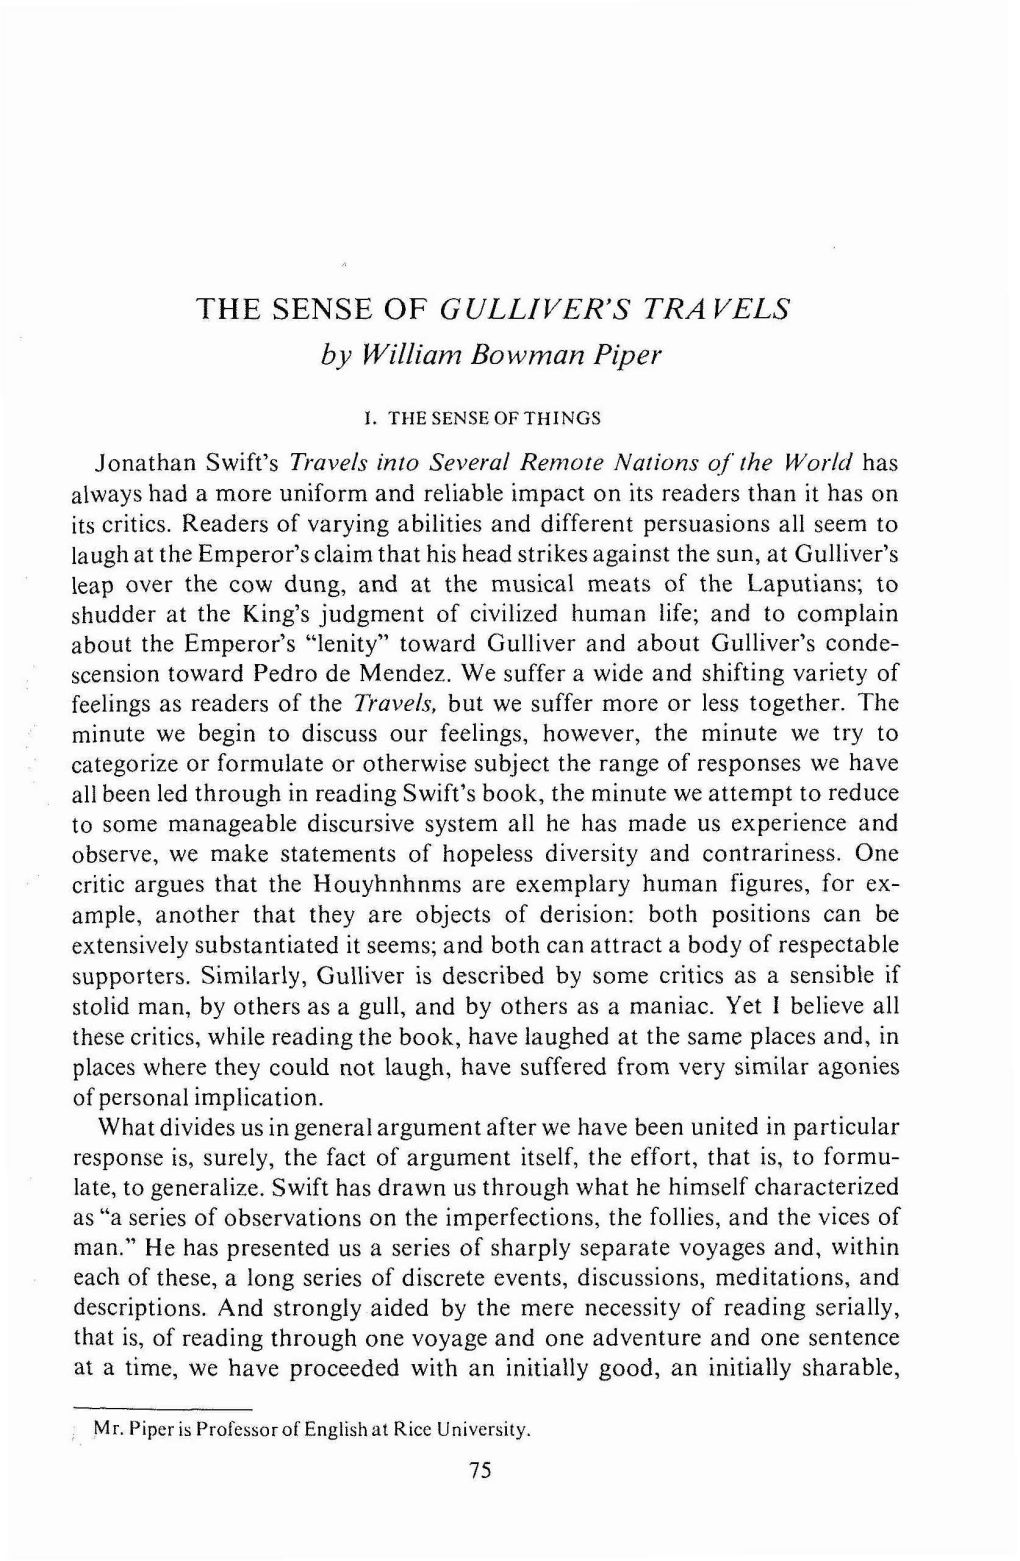 THE SENSE of GULLIVER's TRA VELS by William Bowman Piper